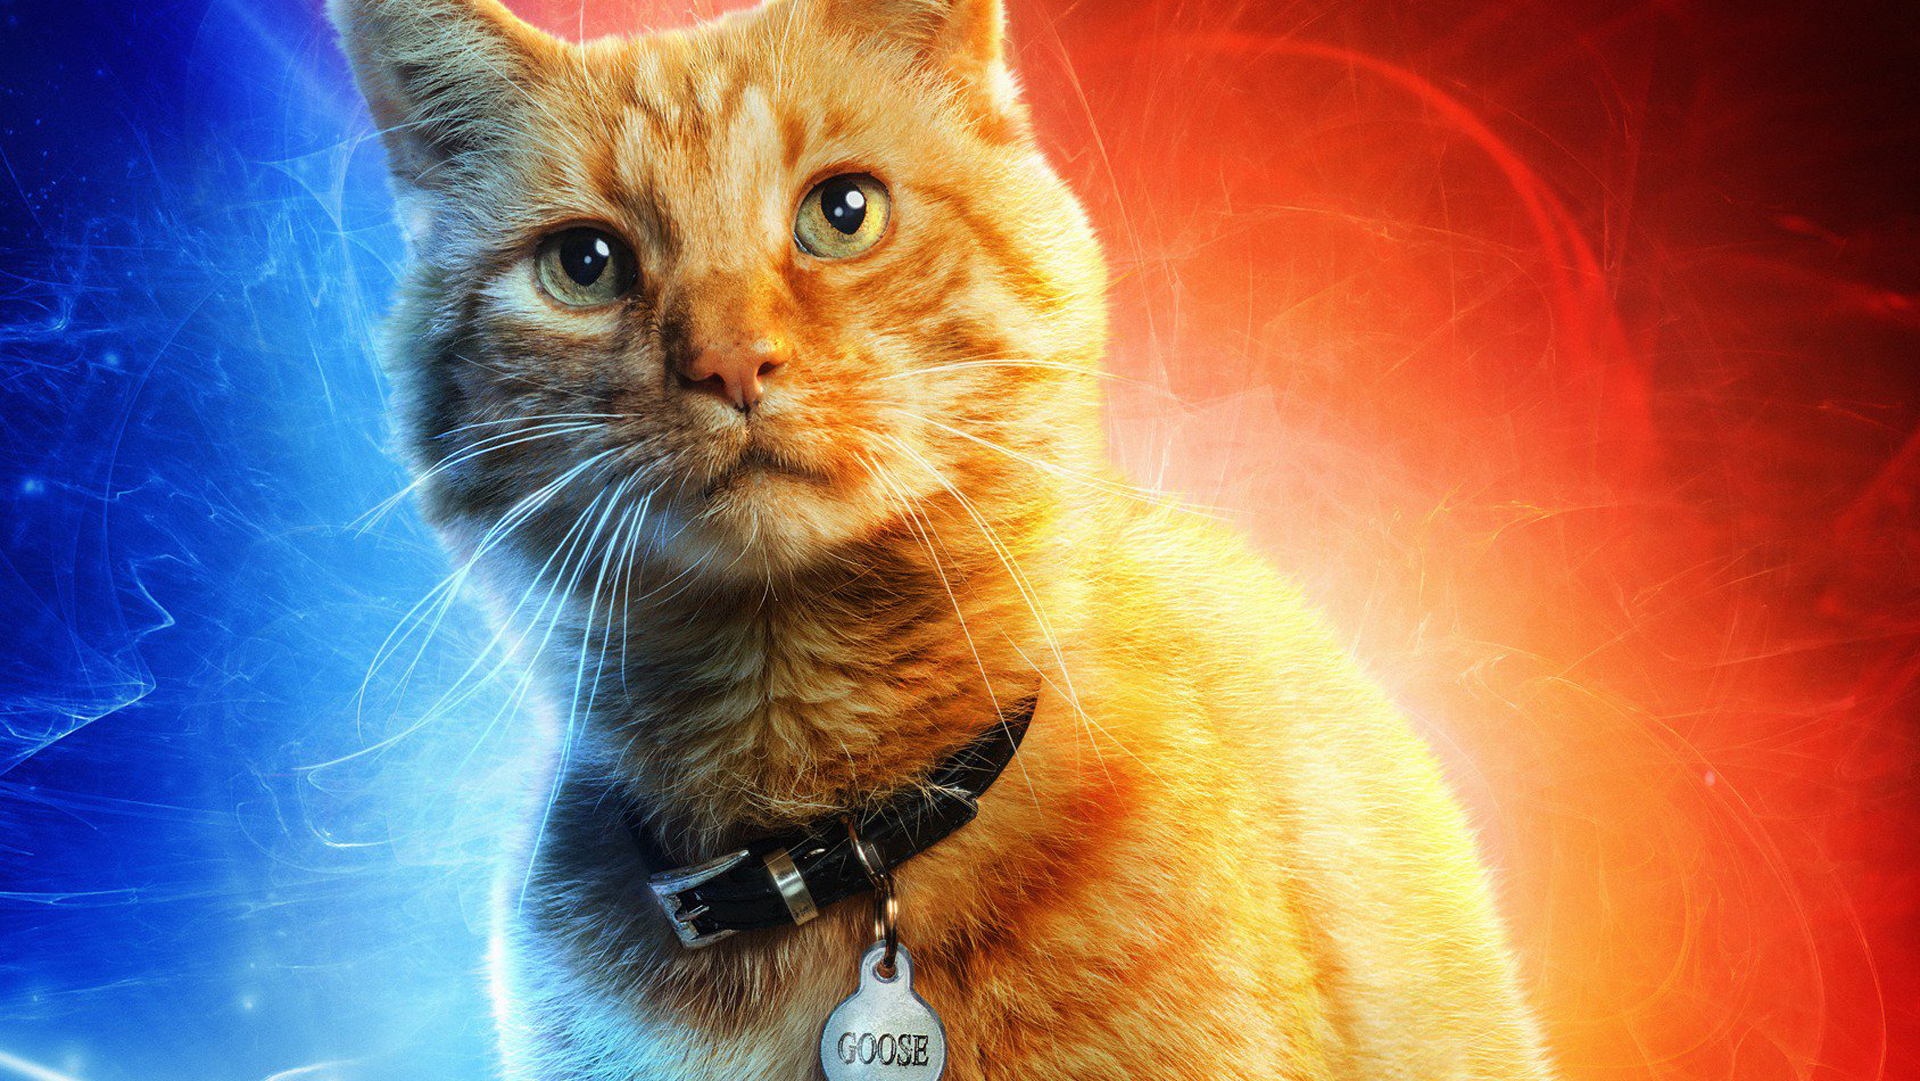 Goose The Cat In Captain Marvel, HD Movies, 4k Wallpaper